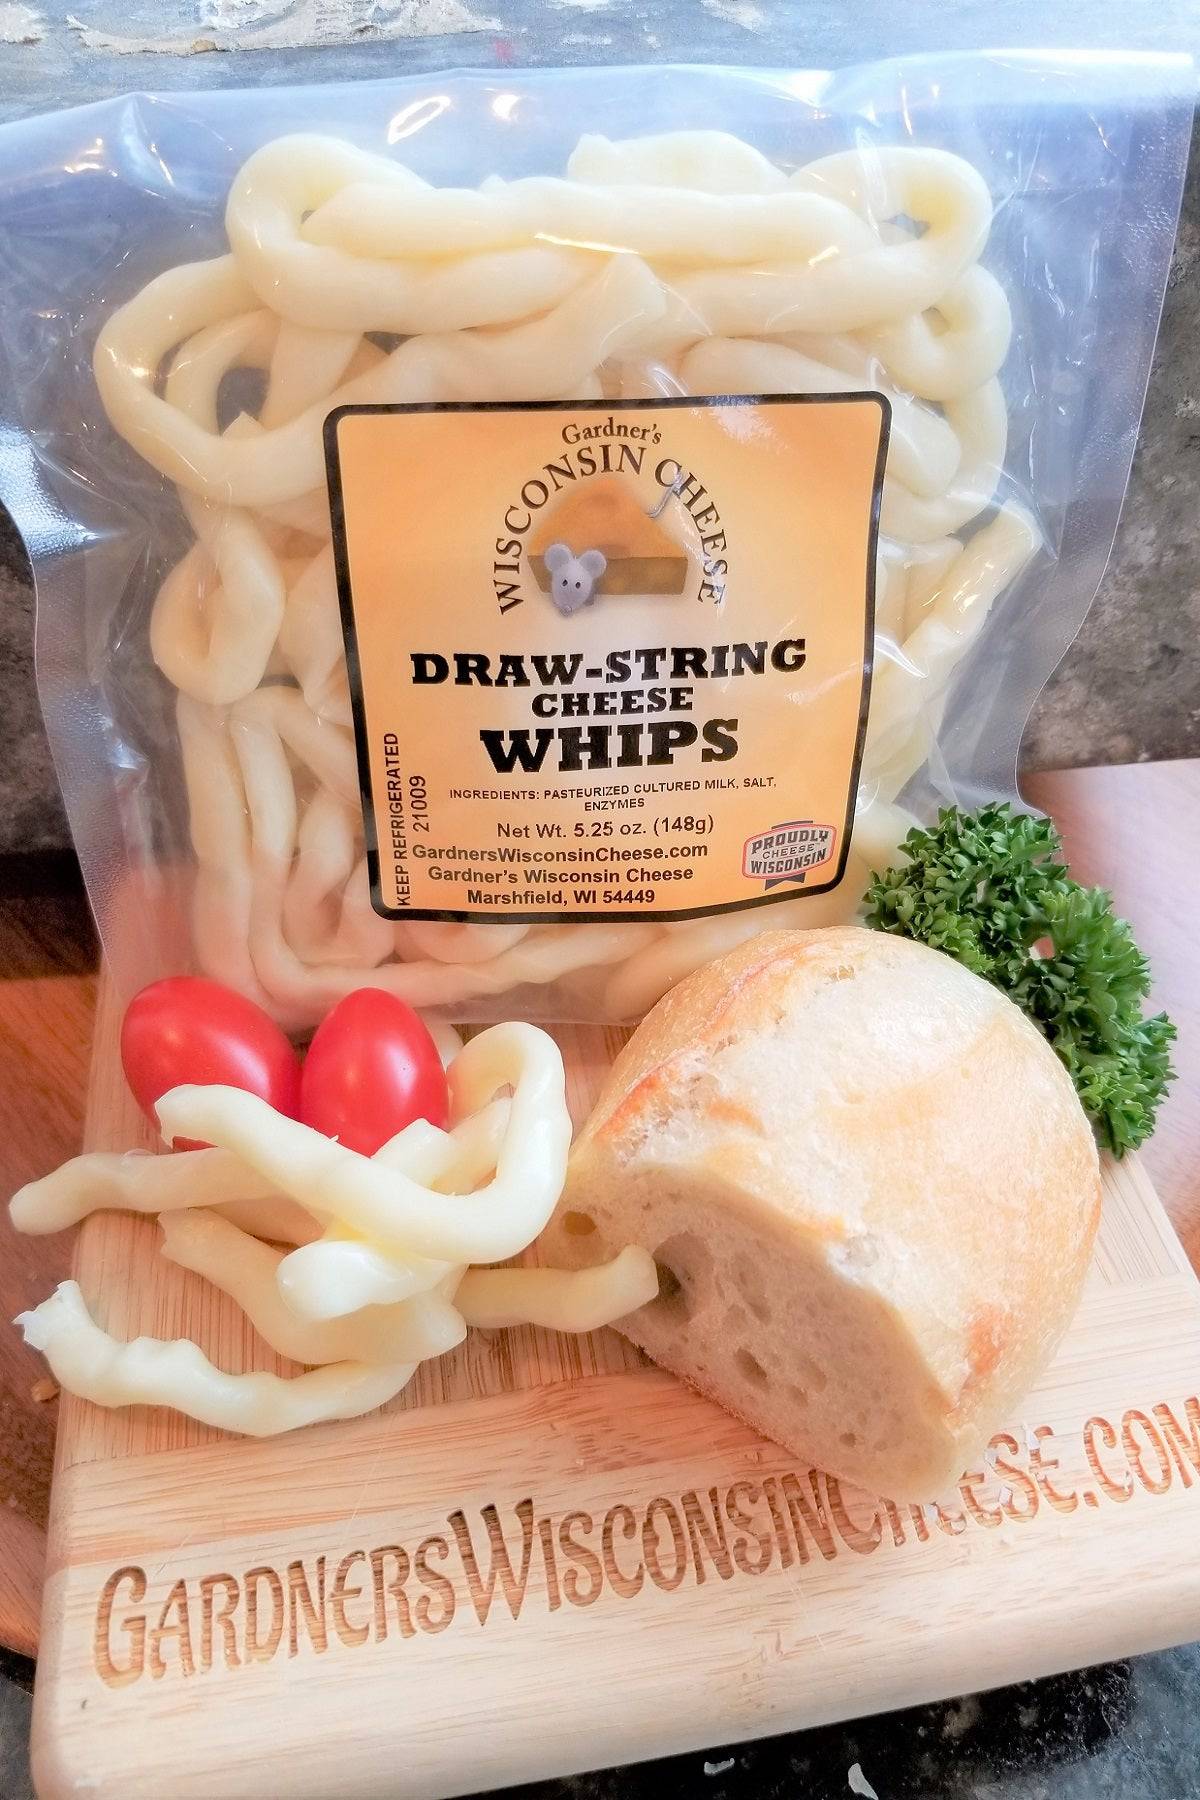 Draw-String-Cheese Whips - Gardners Wisconsin Cheese and Sausage